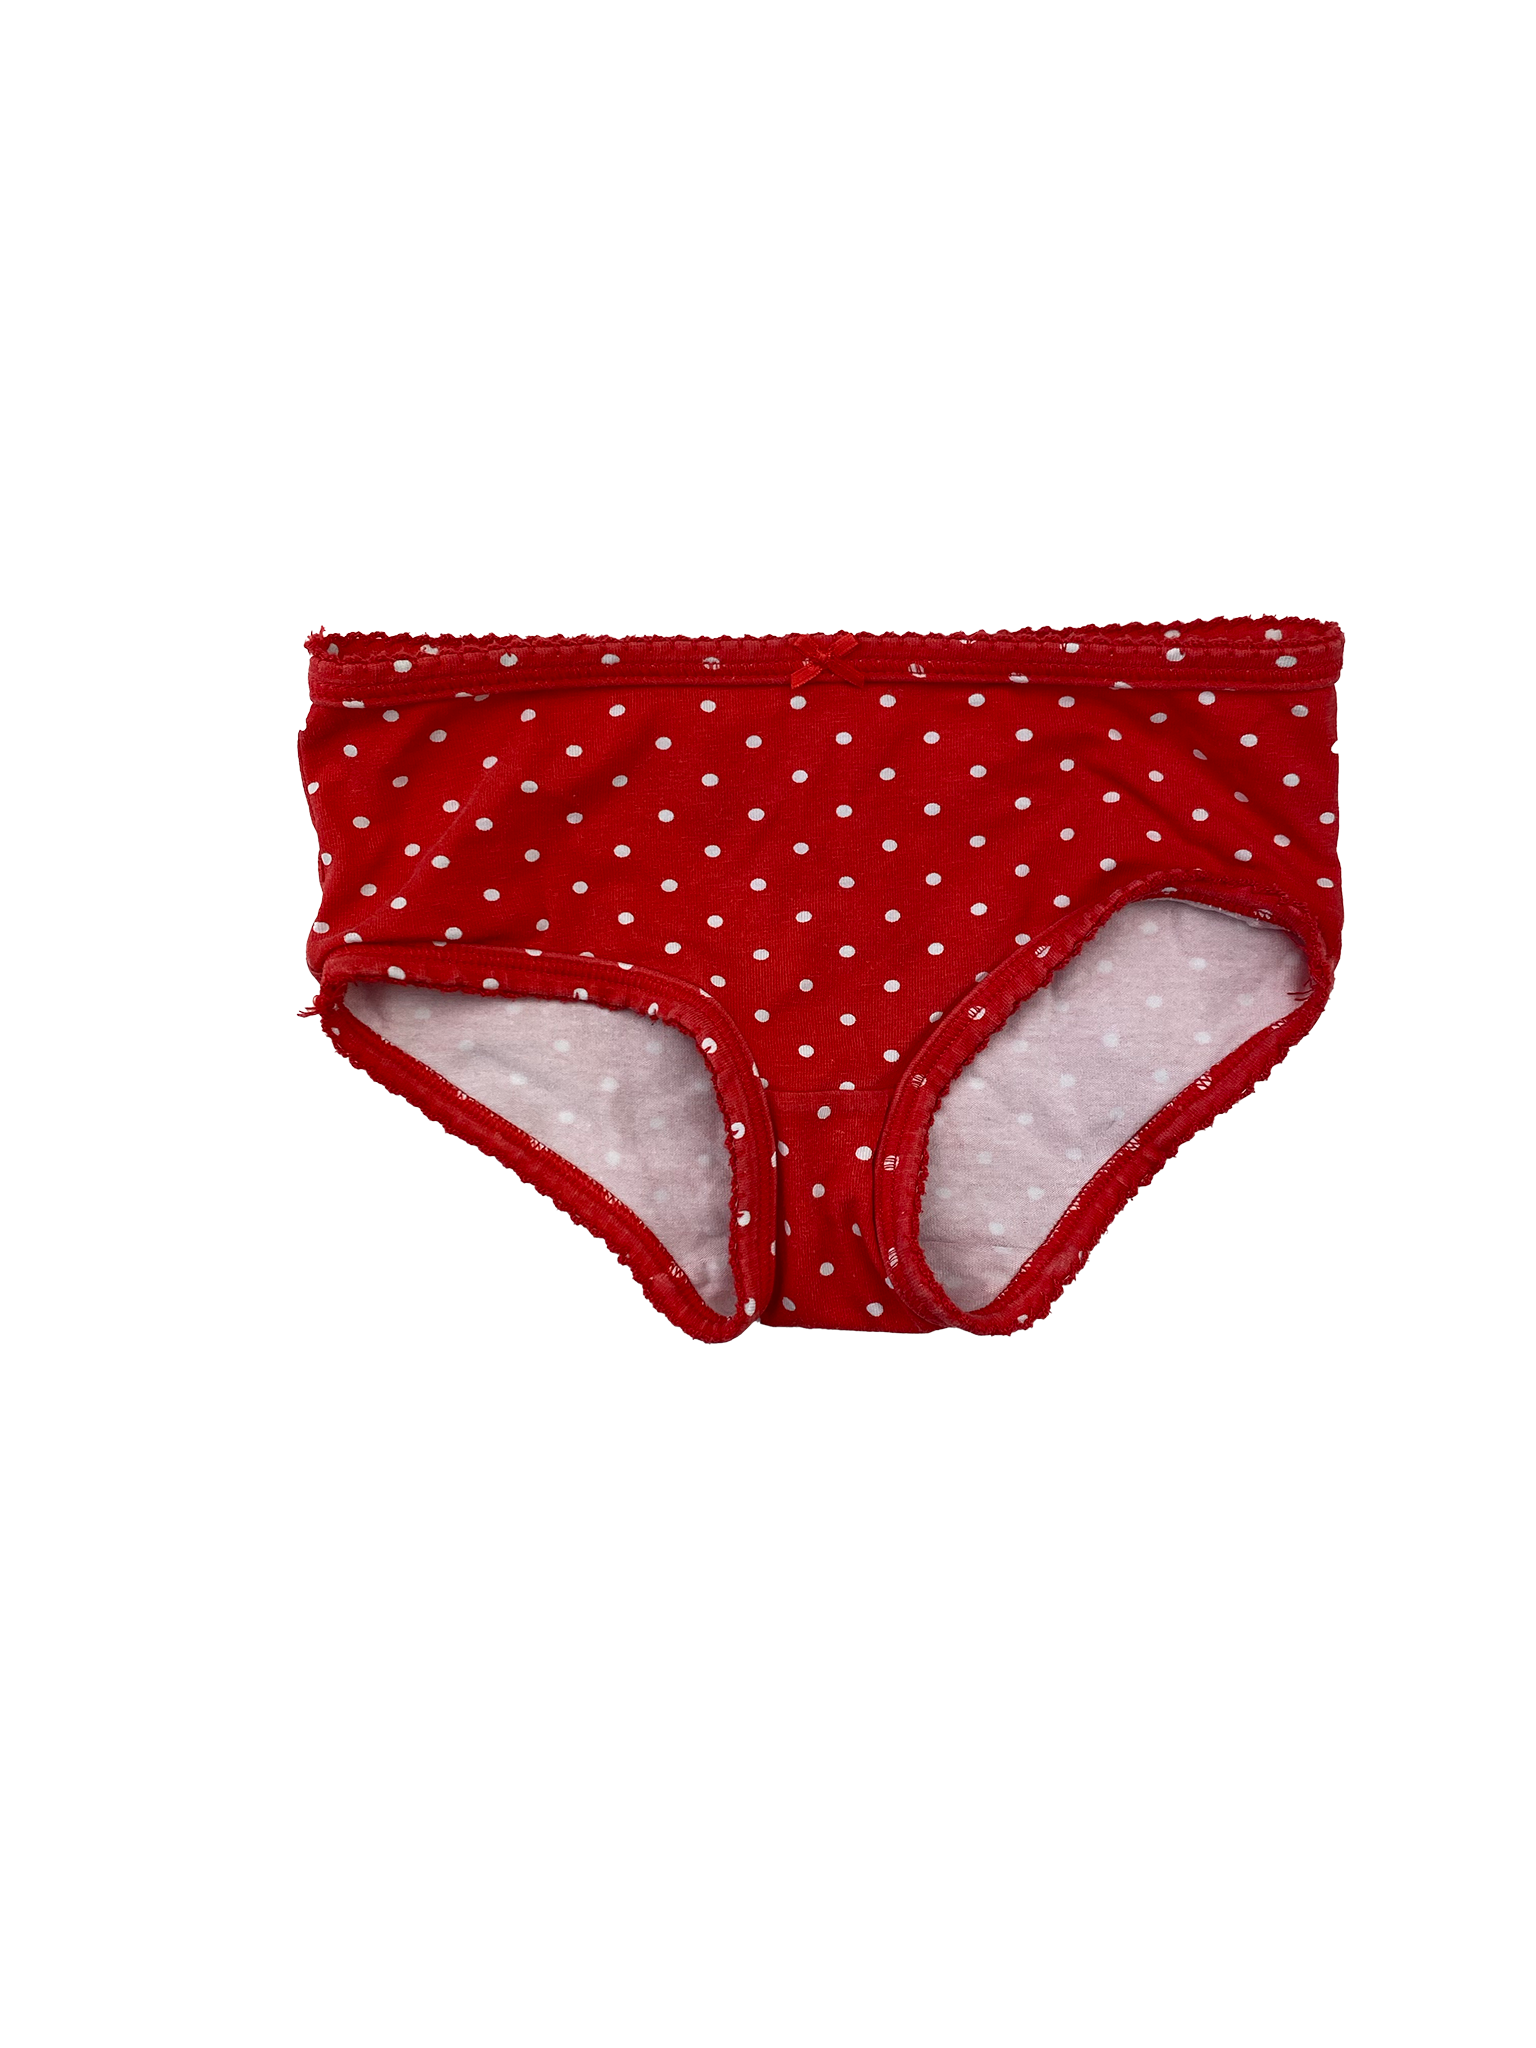 Carter's Red Underwear with White Dots 2-3T